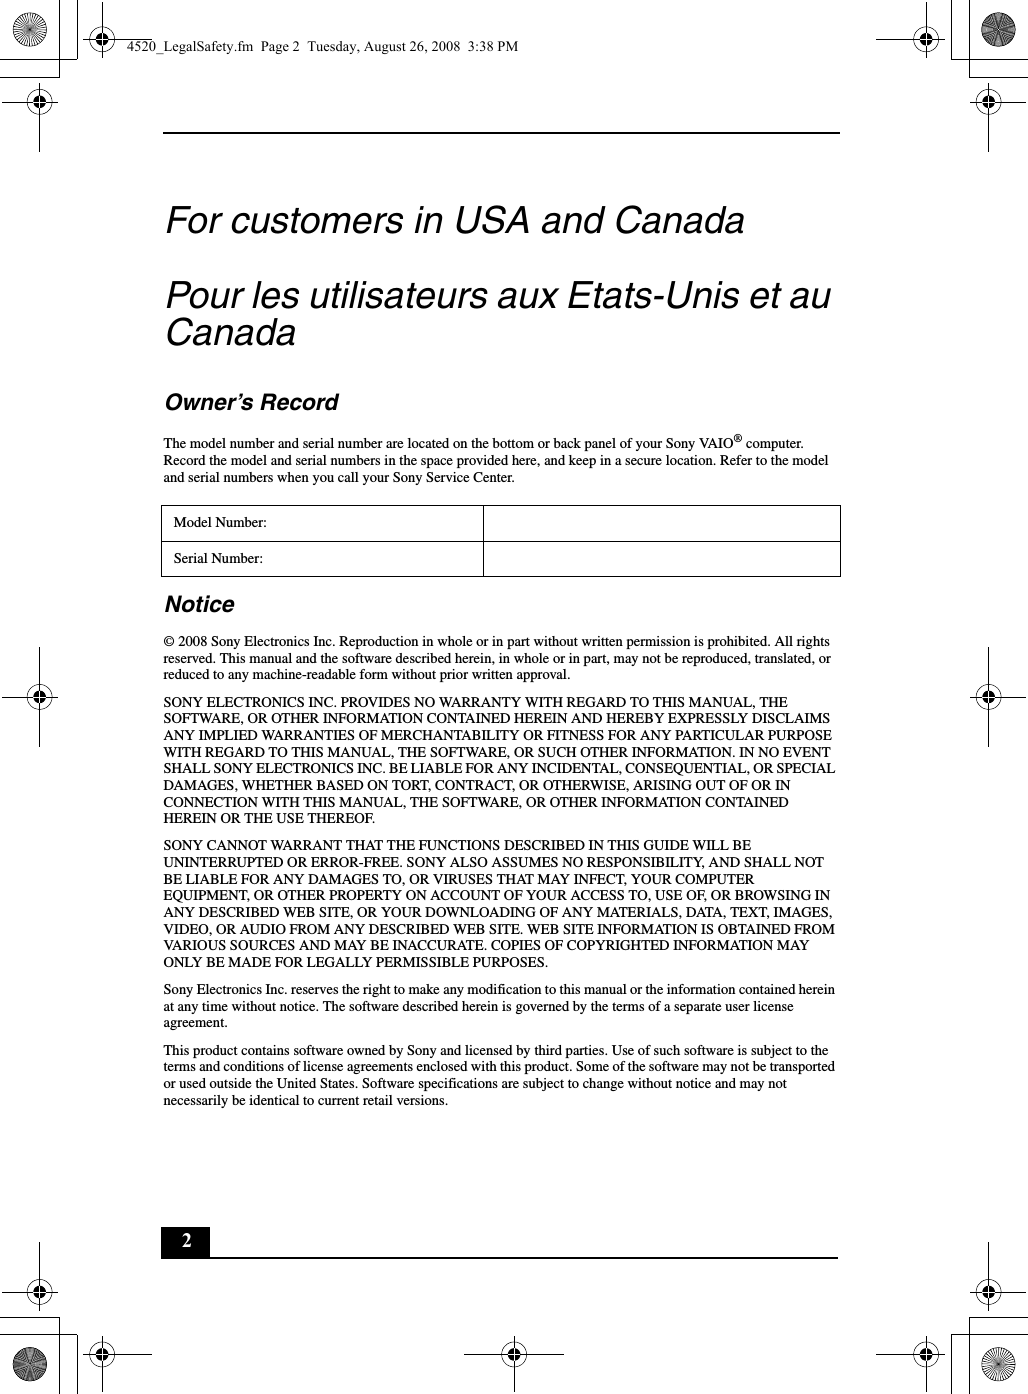 2For customers in USA and CanadaPour les utilisateurs aux Etats-Unis et au CanadaOwner’s RecordThe model number and serial number are located on the bottom or back panel of your Sony VAIO® computer. Record the model and serial numbers in the space provided here, and keep in a secure location. Refer to the model and serial numbers when you call your Sony Service Center.Notice© 2008 Sony Electronics Inc. Reproduction in whole or in part without written permission is prohibited. All rights reserved. This manual and the software described herein, in whole or in part, may not be reproduced, translated, or reduced to any machine-readable form without prior written approval.SONY ELECTRONICS INC. PROVIDES NO WARRANTY WITH REGARD TO THIS MANUAL, THE SOFTWARE, OR OTHER INFORMATION CONTAINED HEREIN AND HEREBY EXPRESSLY DISCLAIMS ANY IMPLIED WARRANTIES OF MERCHANTABILITY OR FITNESS FOR ANY PARTICULAR PURPOSE WITH REGARD TO THIS MANUAL, THE SOFTWARE, OR SUCH OTHER INFORMATION. IN NO EVENT SHALL SONY ELECTRONICS INC. BE LIABLE FOR ANY INCIDENTAL, CONSEQUENTIAL, OR SPECIAL DAMAGES, WHETHER BASED ON TORT, CONTRACT, OR OTHERWISE, ARISING OUT OF OR IN CONNECTION WITH THIS MANUAL, THE SOFTWARE, OR OTHER INFORMATION CONTAINED HEREIN OR THE USE THEREOF.SONY CANNOT WARRANT THAT THE FUNCTIONS DESCRIBED IN THIS GUIDE WILL BE UNINTERRUPTED OR ERROR-FREE. SONY ALSO ASSUMES NO RESPONSIBILITY, AND SHALL NOT BE LIABLE FOR ANY DAMAGES TO, OR VIRUSES THAT MAY INFECT, YOUR COMPUTER EQUIPMENT, OR OTHER PROPERTY ON ACCOUNT OF YOUR ACCESS TO, USE OF, OR BROWSING IN ANY DESCRIBED WEB SITE, OR YOUR DOWNLOADING OF ANY MATERIALS, DATA, TEXT, IMAGES, VIDEO, OR AUDIO FROM ANY DESCRIBED WEB SITE. WEB SITE INFORMATION IS OBTAINED FROM VARIOUS SOURCES AND MAY BE INACCURATE. COPIES OF COPYRIGHTED INFORMATION MAY ONLY BE MADE FOR LEGALLY PERMISSIBLE PURPOSES.Sony Electronics Inc. reserves the right to make any modification to this manual or the information contained herein at any time without notice. The software described herein is governed by the terms of a separate user license agreement.This product contains software owned by Sony and licensed by third parties. Use of such software is subject to the terms and conditions of license agreements enclosed with this product. Some of the software may not be transported or used outside the United States. Software specifications are subject to change without notice and may not necessarily be identical to current retail versions.Model Number:Serial Number:4520_LegalSafety.fm  Page 2  Tuesday, August 26, 2008  3:38 PM